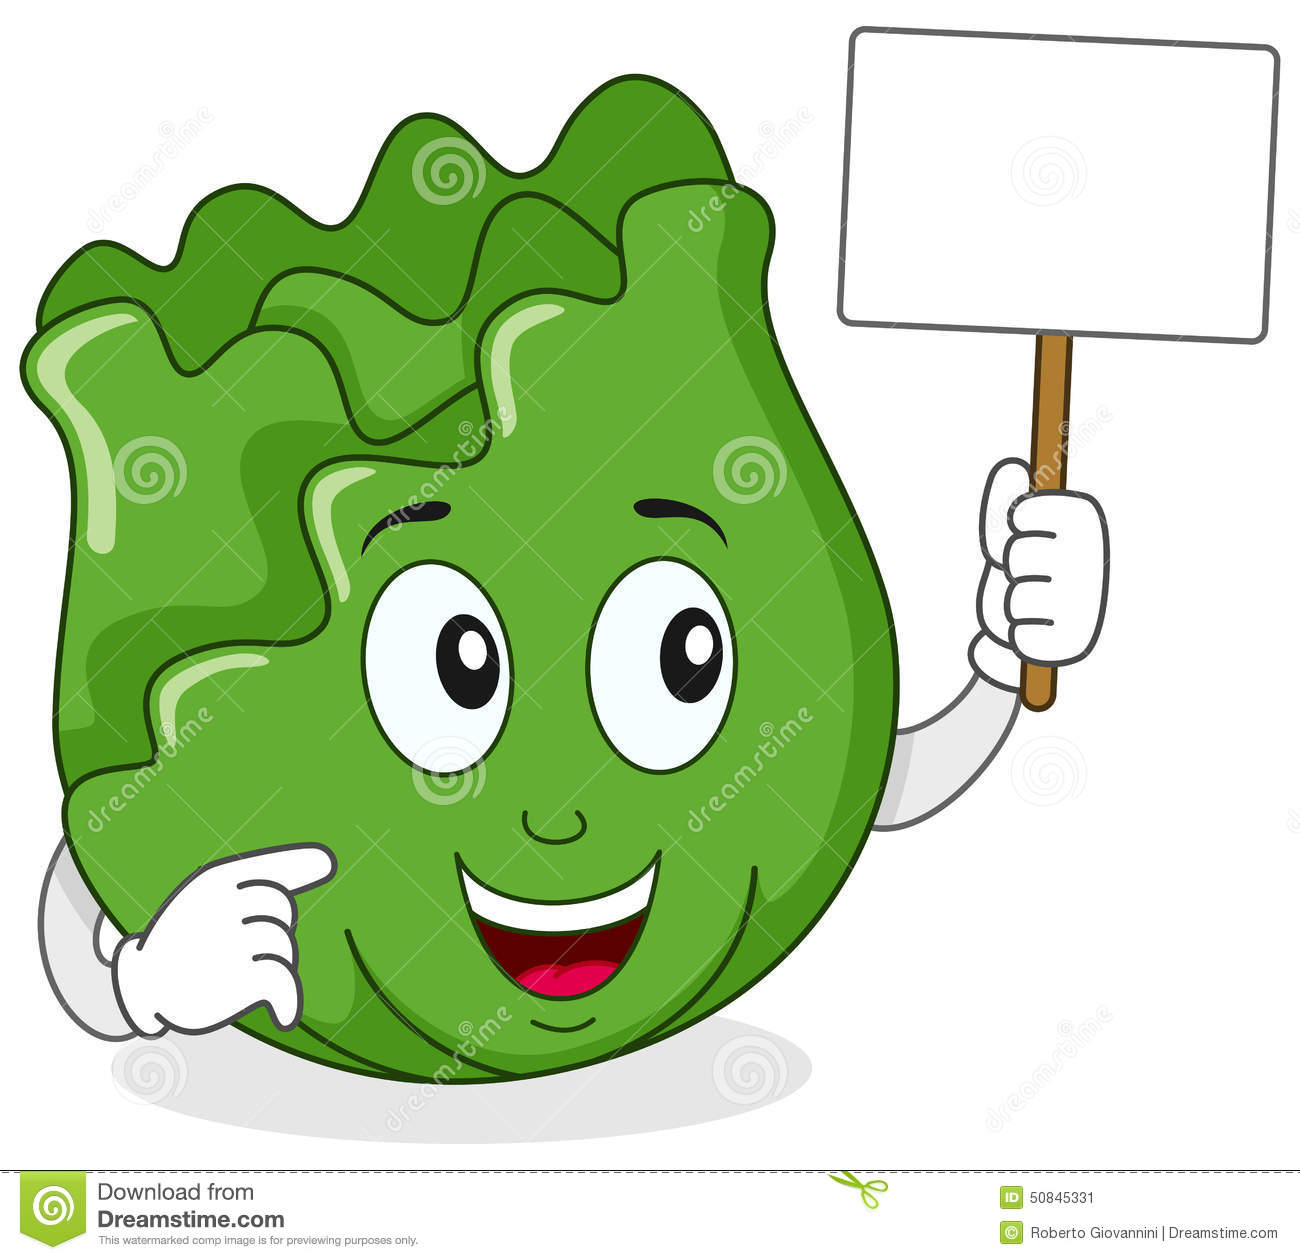 Pencil and in color. Cabbage clipart happy